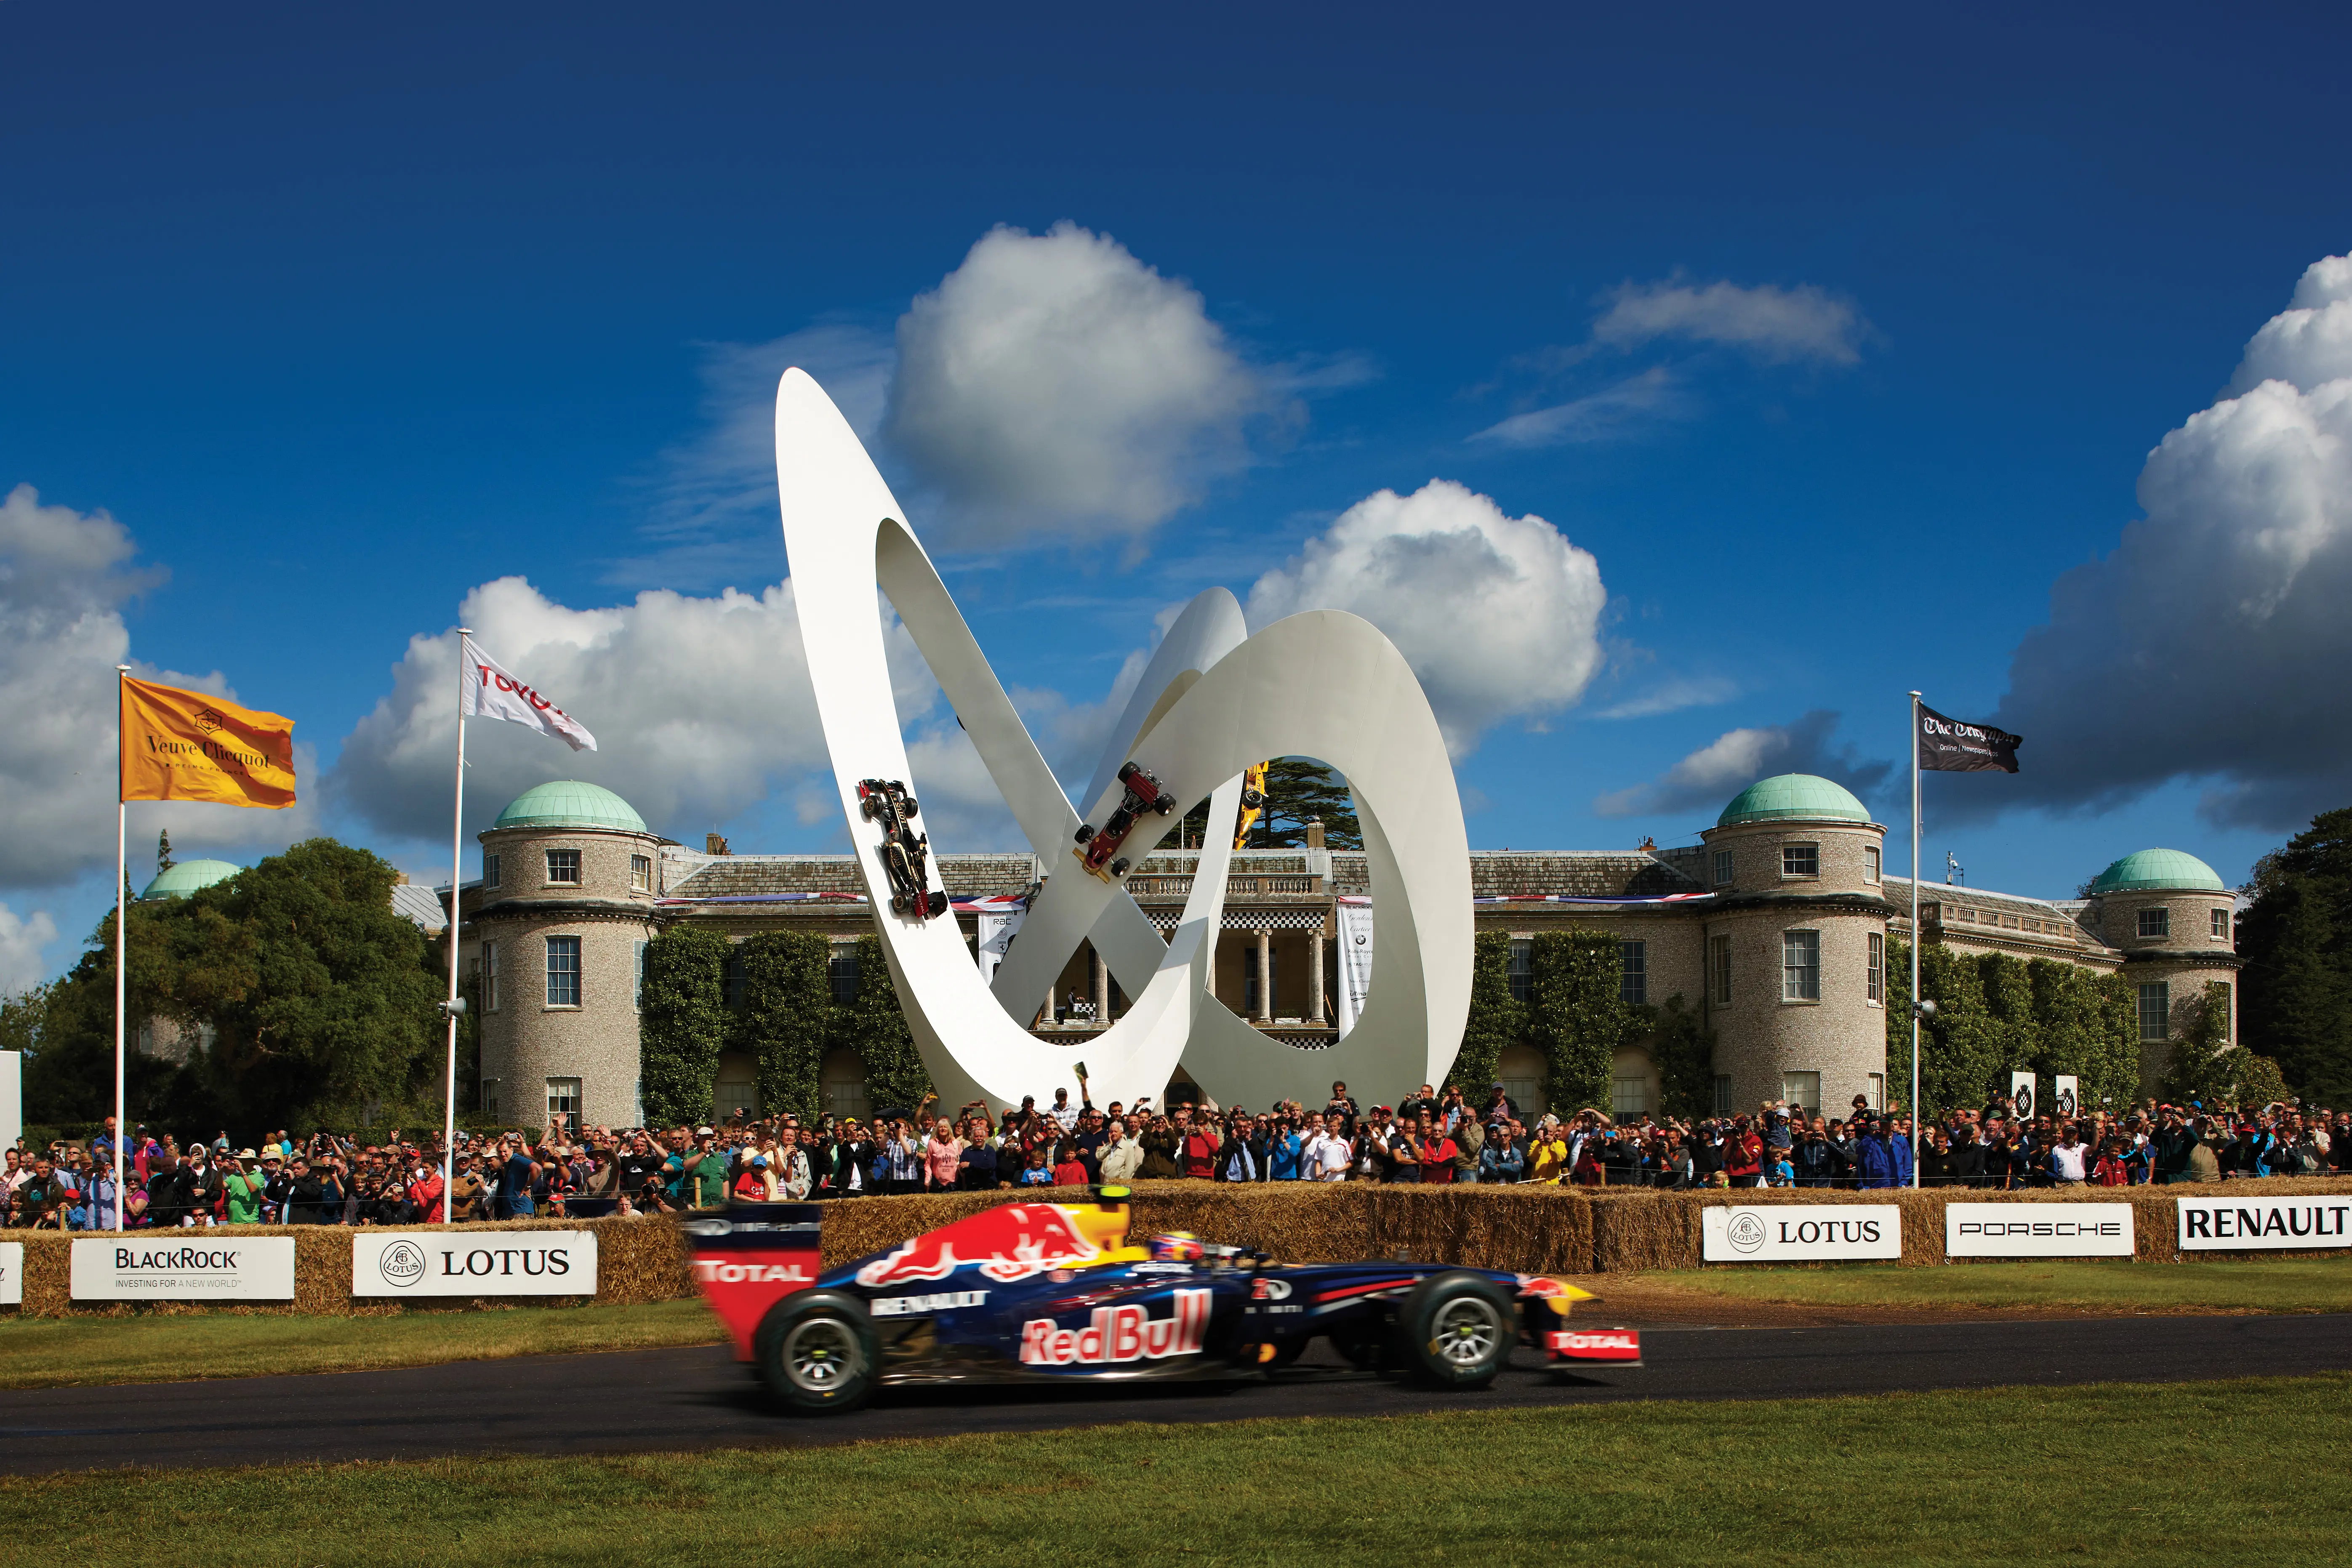 Racing car at the Goodwood Festival of Speed track with the big figure of eight sculpture created by Gerry Judah in the background.